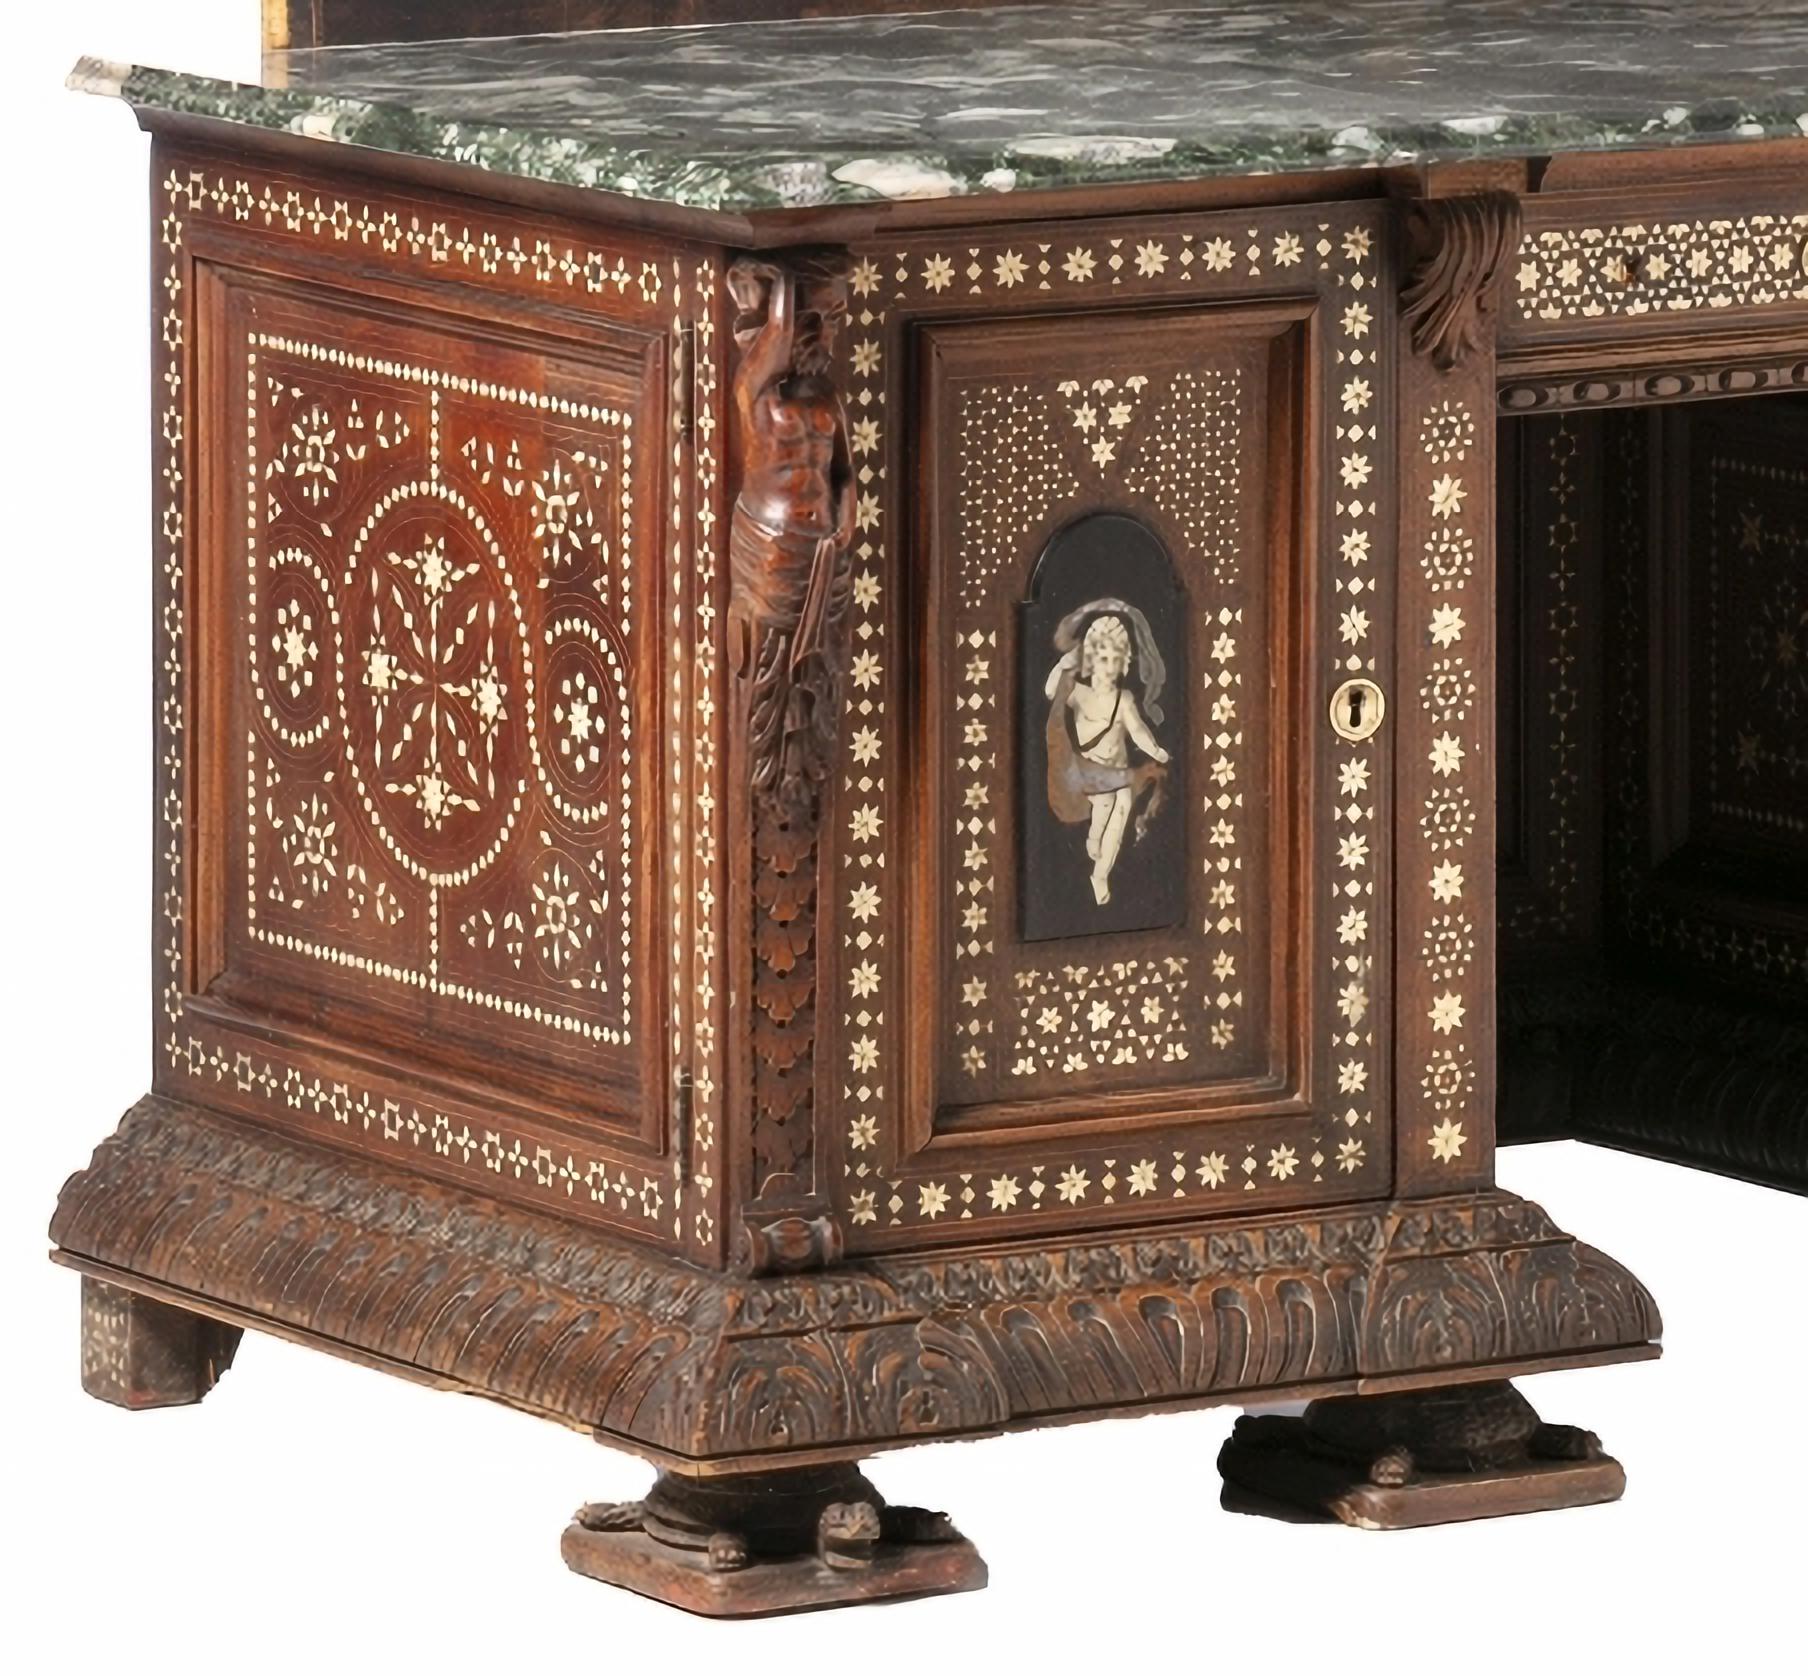 RARE AND SPECTACULAR 19th Century ITALIAN DRESSING FURNITURE

Italian
in walnut wood with carvings, inlaid fillets, engraved and hard stones.
Compositions with 